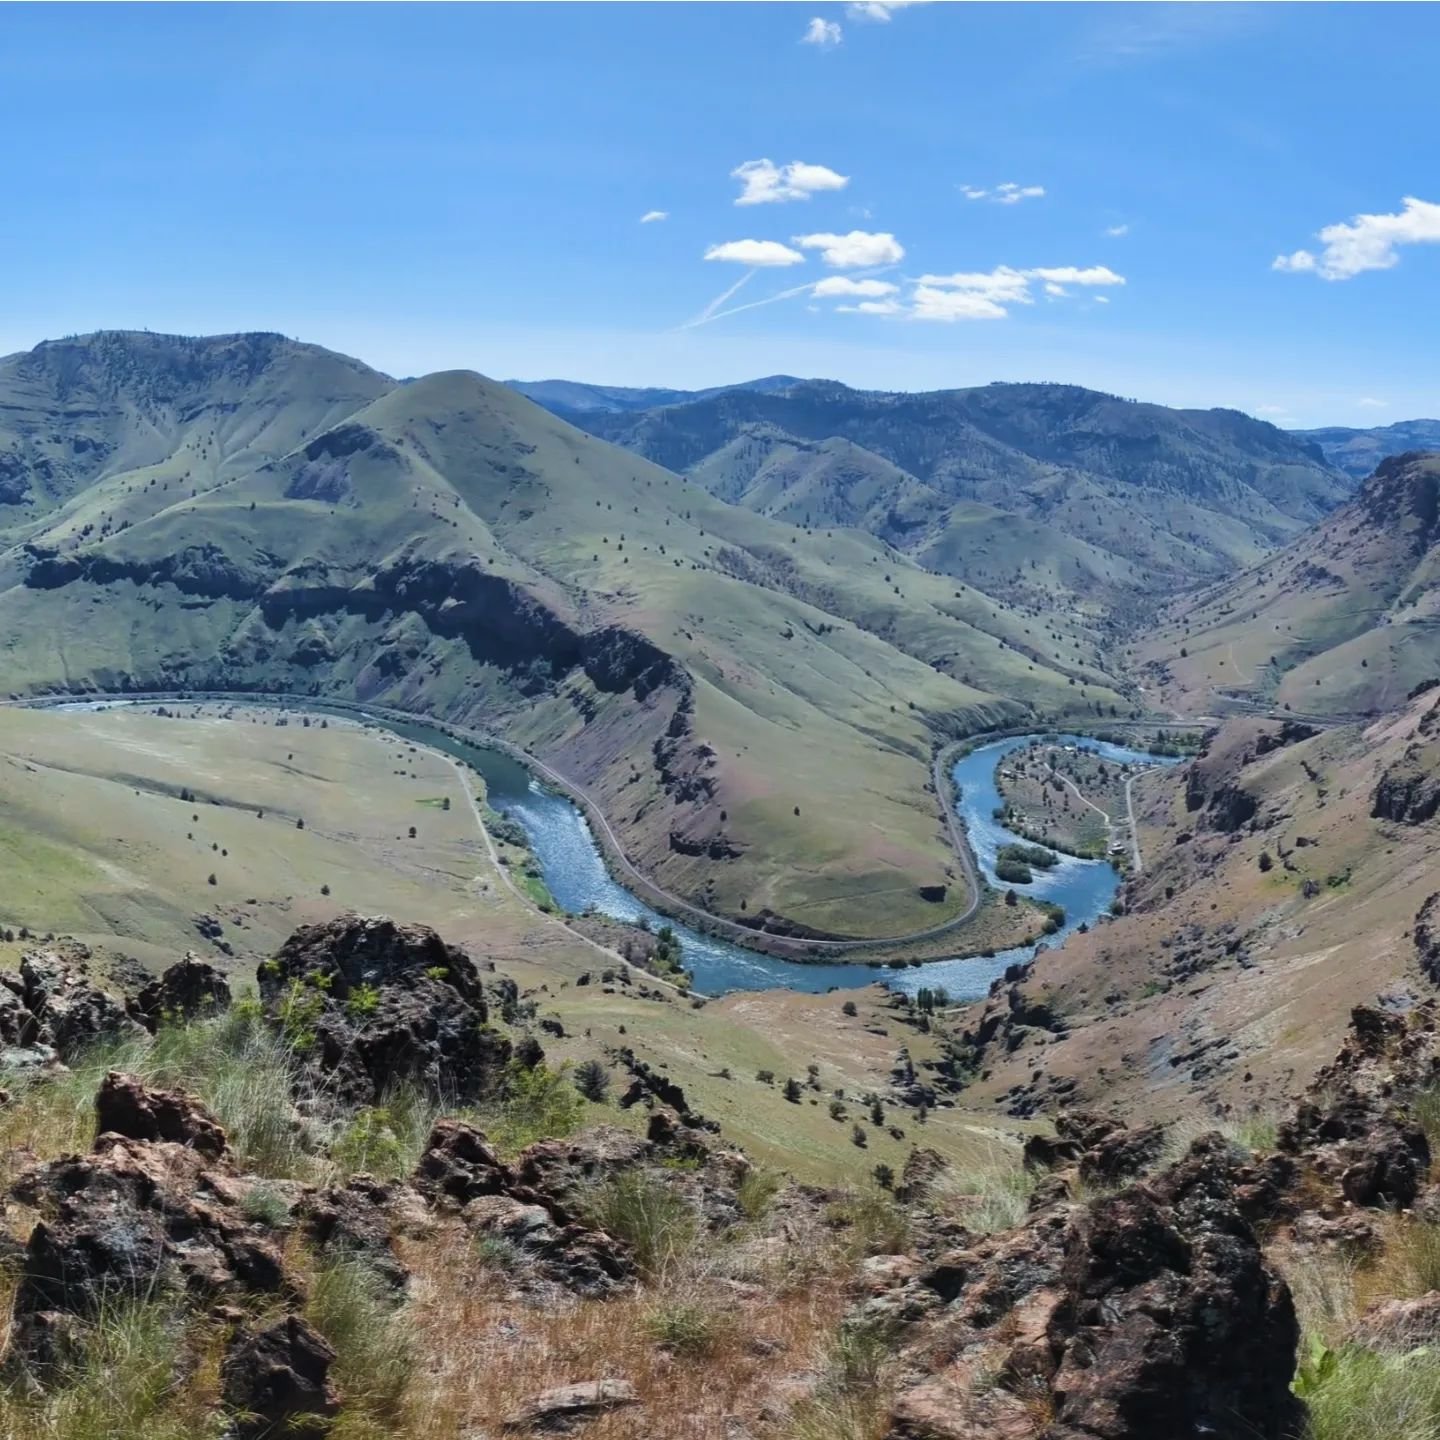 We had quite the adventure exploring the Deschutes canyon today. I led Team Comfort Optional up and over my favorite loop above the river. We hiked 13 miles, much of it on faint trail or no trail. We saw bighorn sheep, lizards, many birds, and no peo